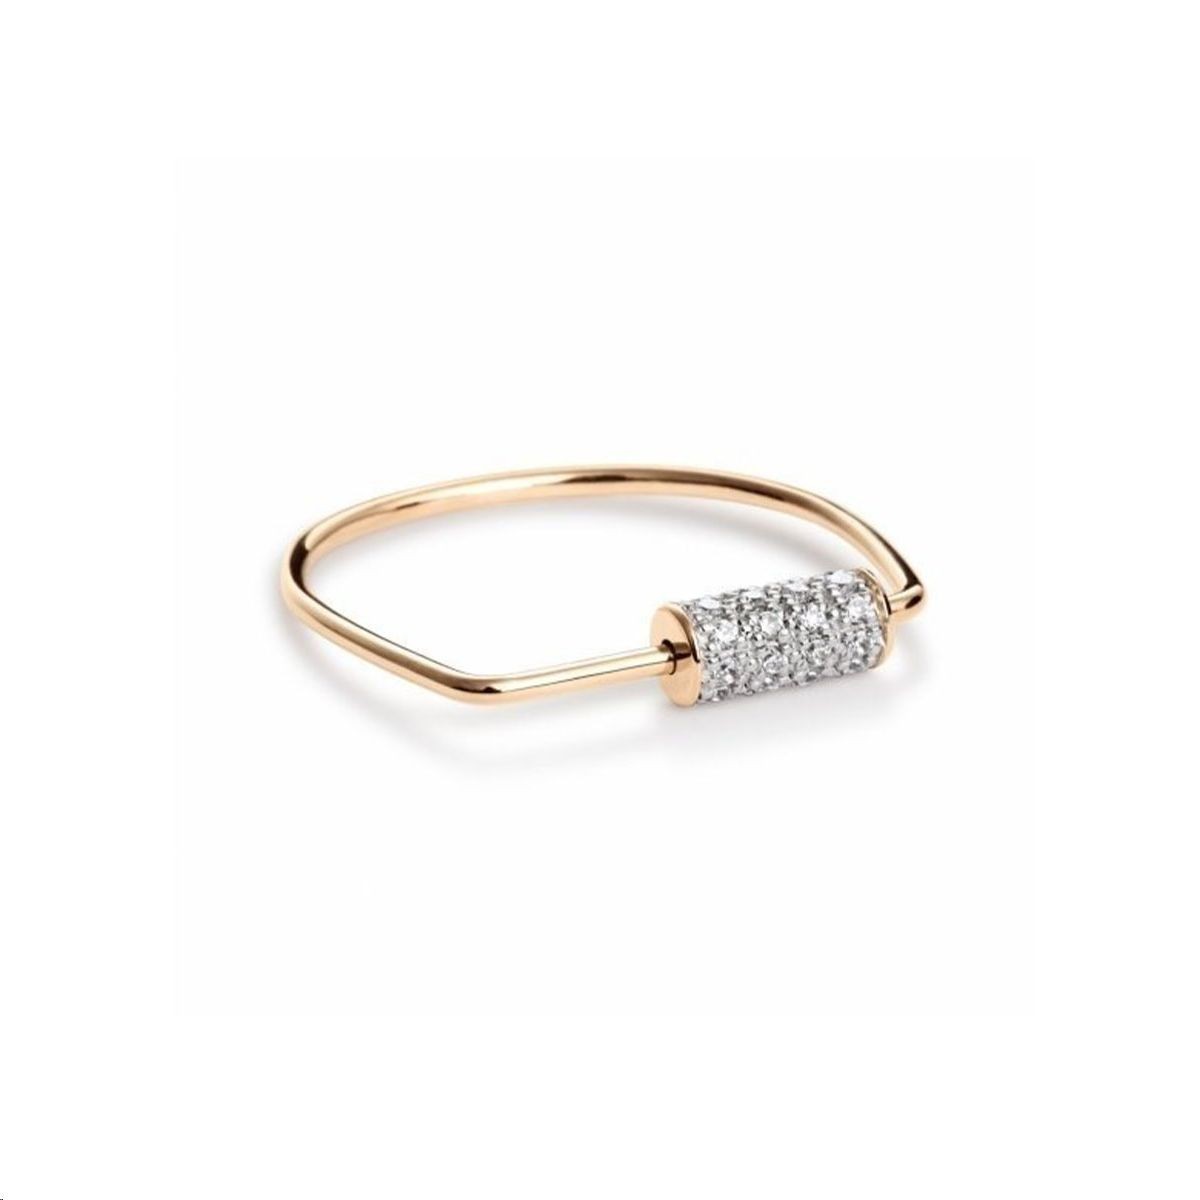 GINETTE NY Bague Mini Straw Diamant Or rose RSTD